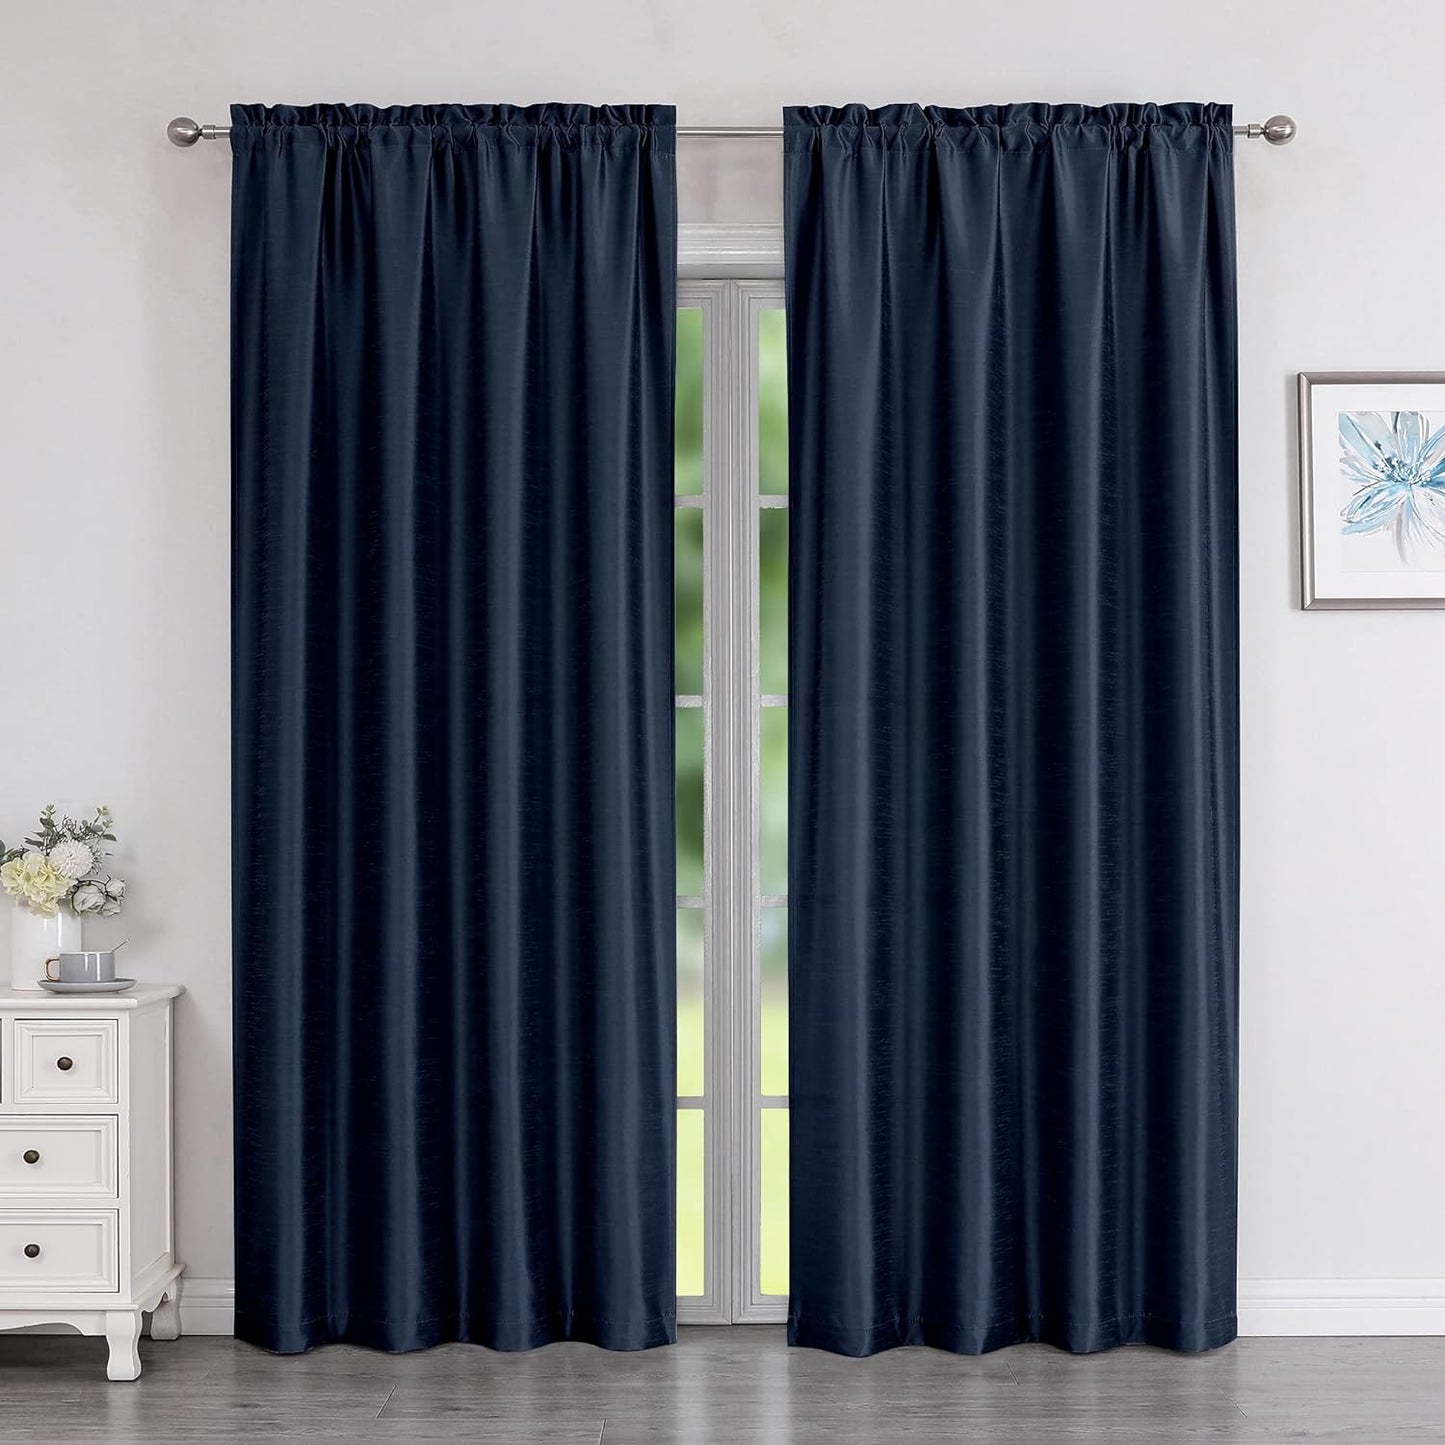 Chyhomenyc Uptown Sage Green Kitchen Curtains 45 Inch Length 2 Panels, Room Darkening Faux Silk Chic Fabric Short Window Curtains for Bedroom Living Room, Each 30Wx45L  Chyhomenyc Navy Blue 2X40"Wx84"L 